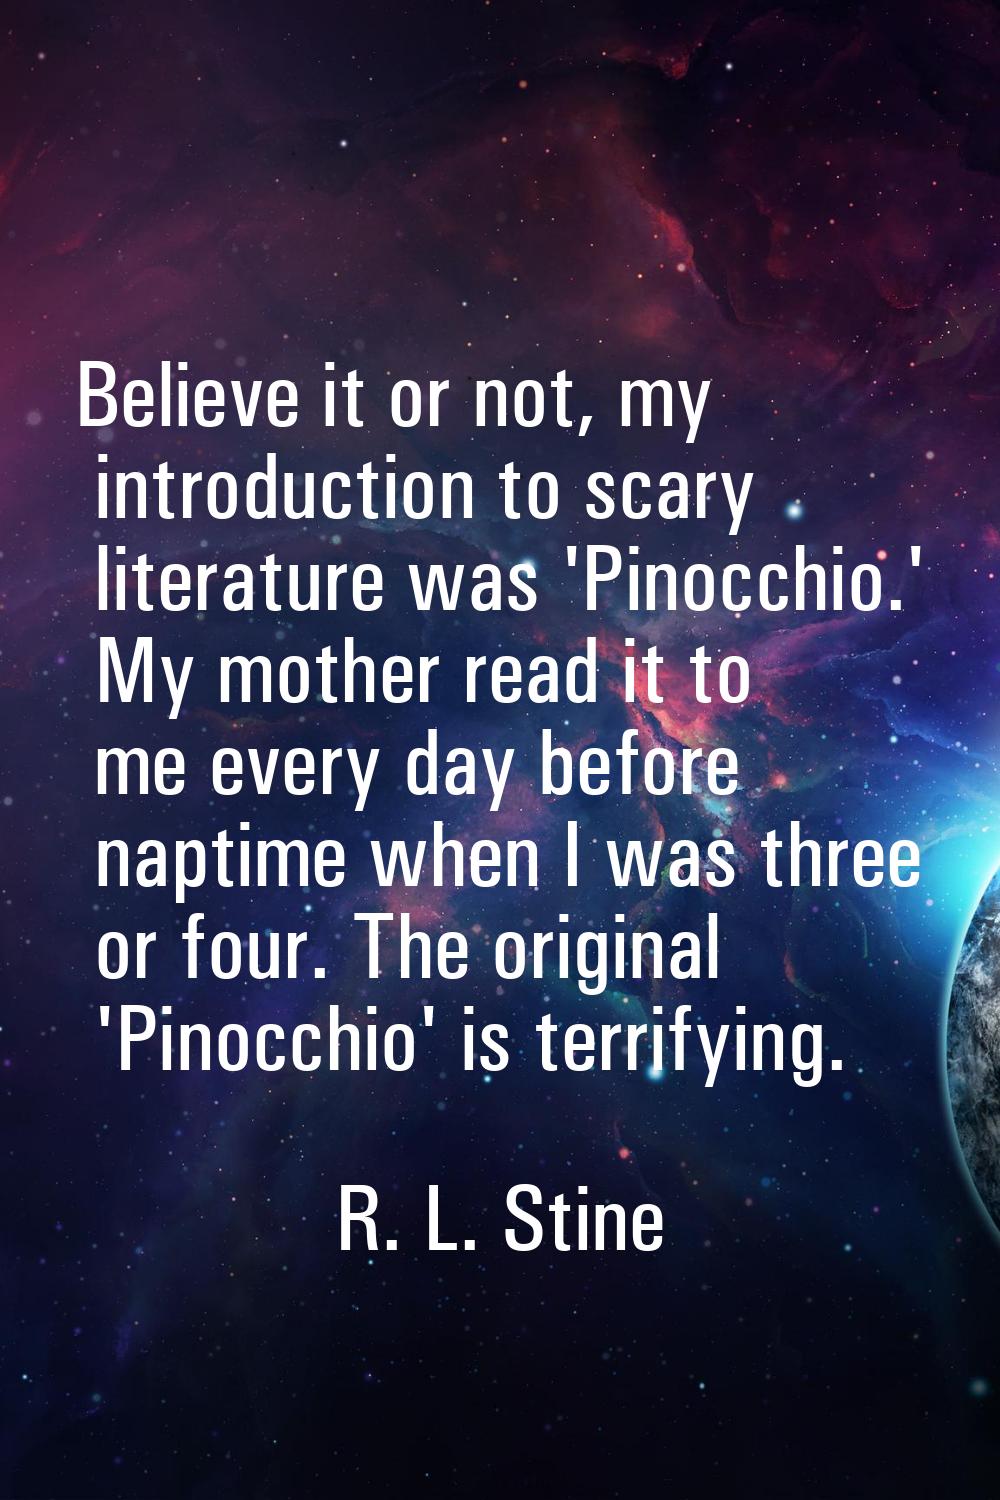 Believe it or not, my introduction to scary literature was 'Pinocchio.' My mother read it to me eve